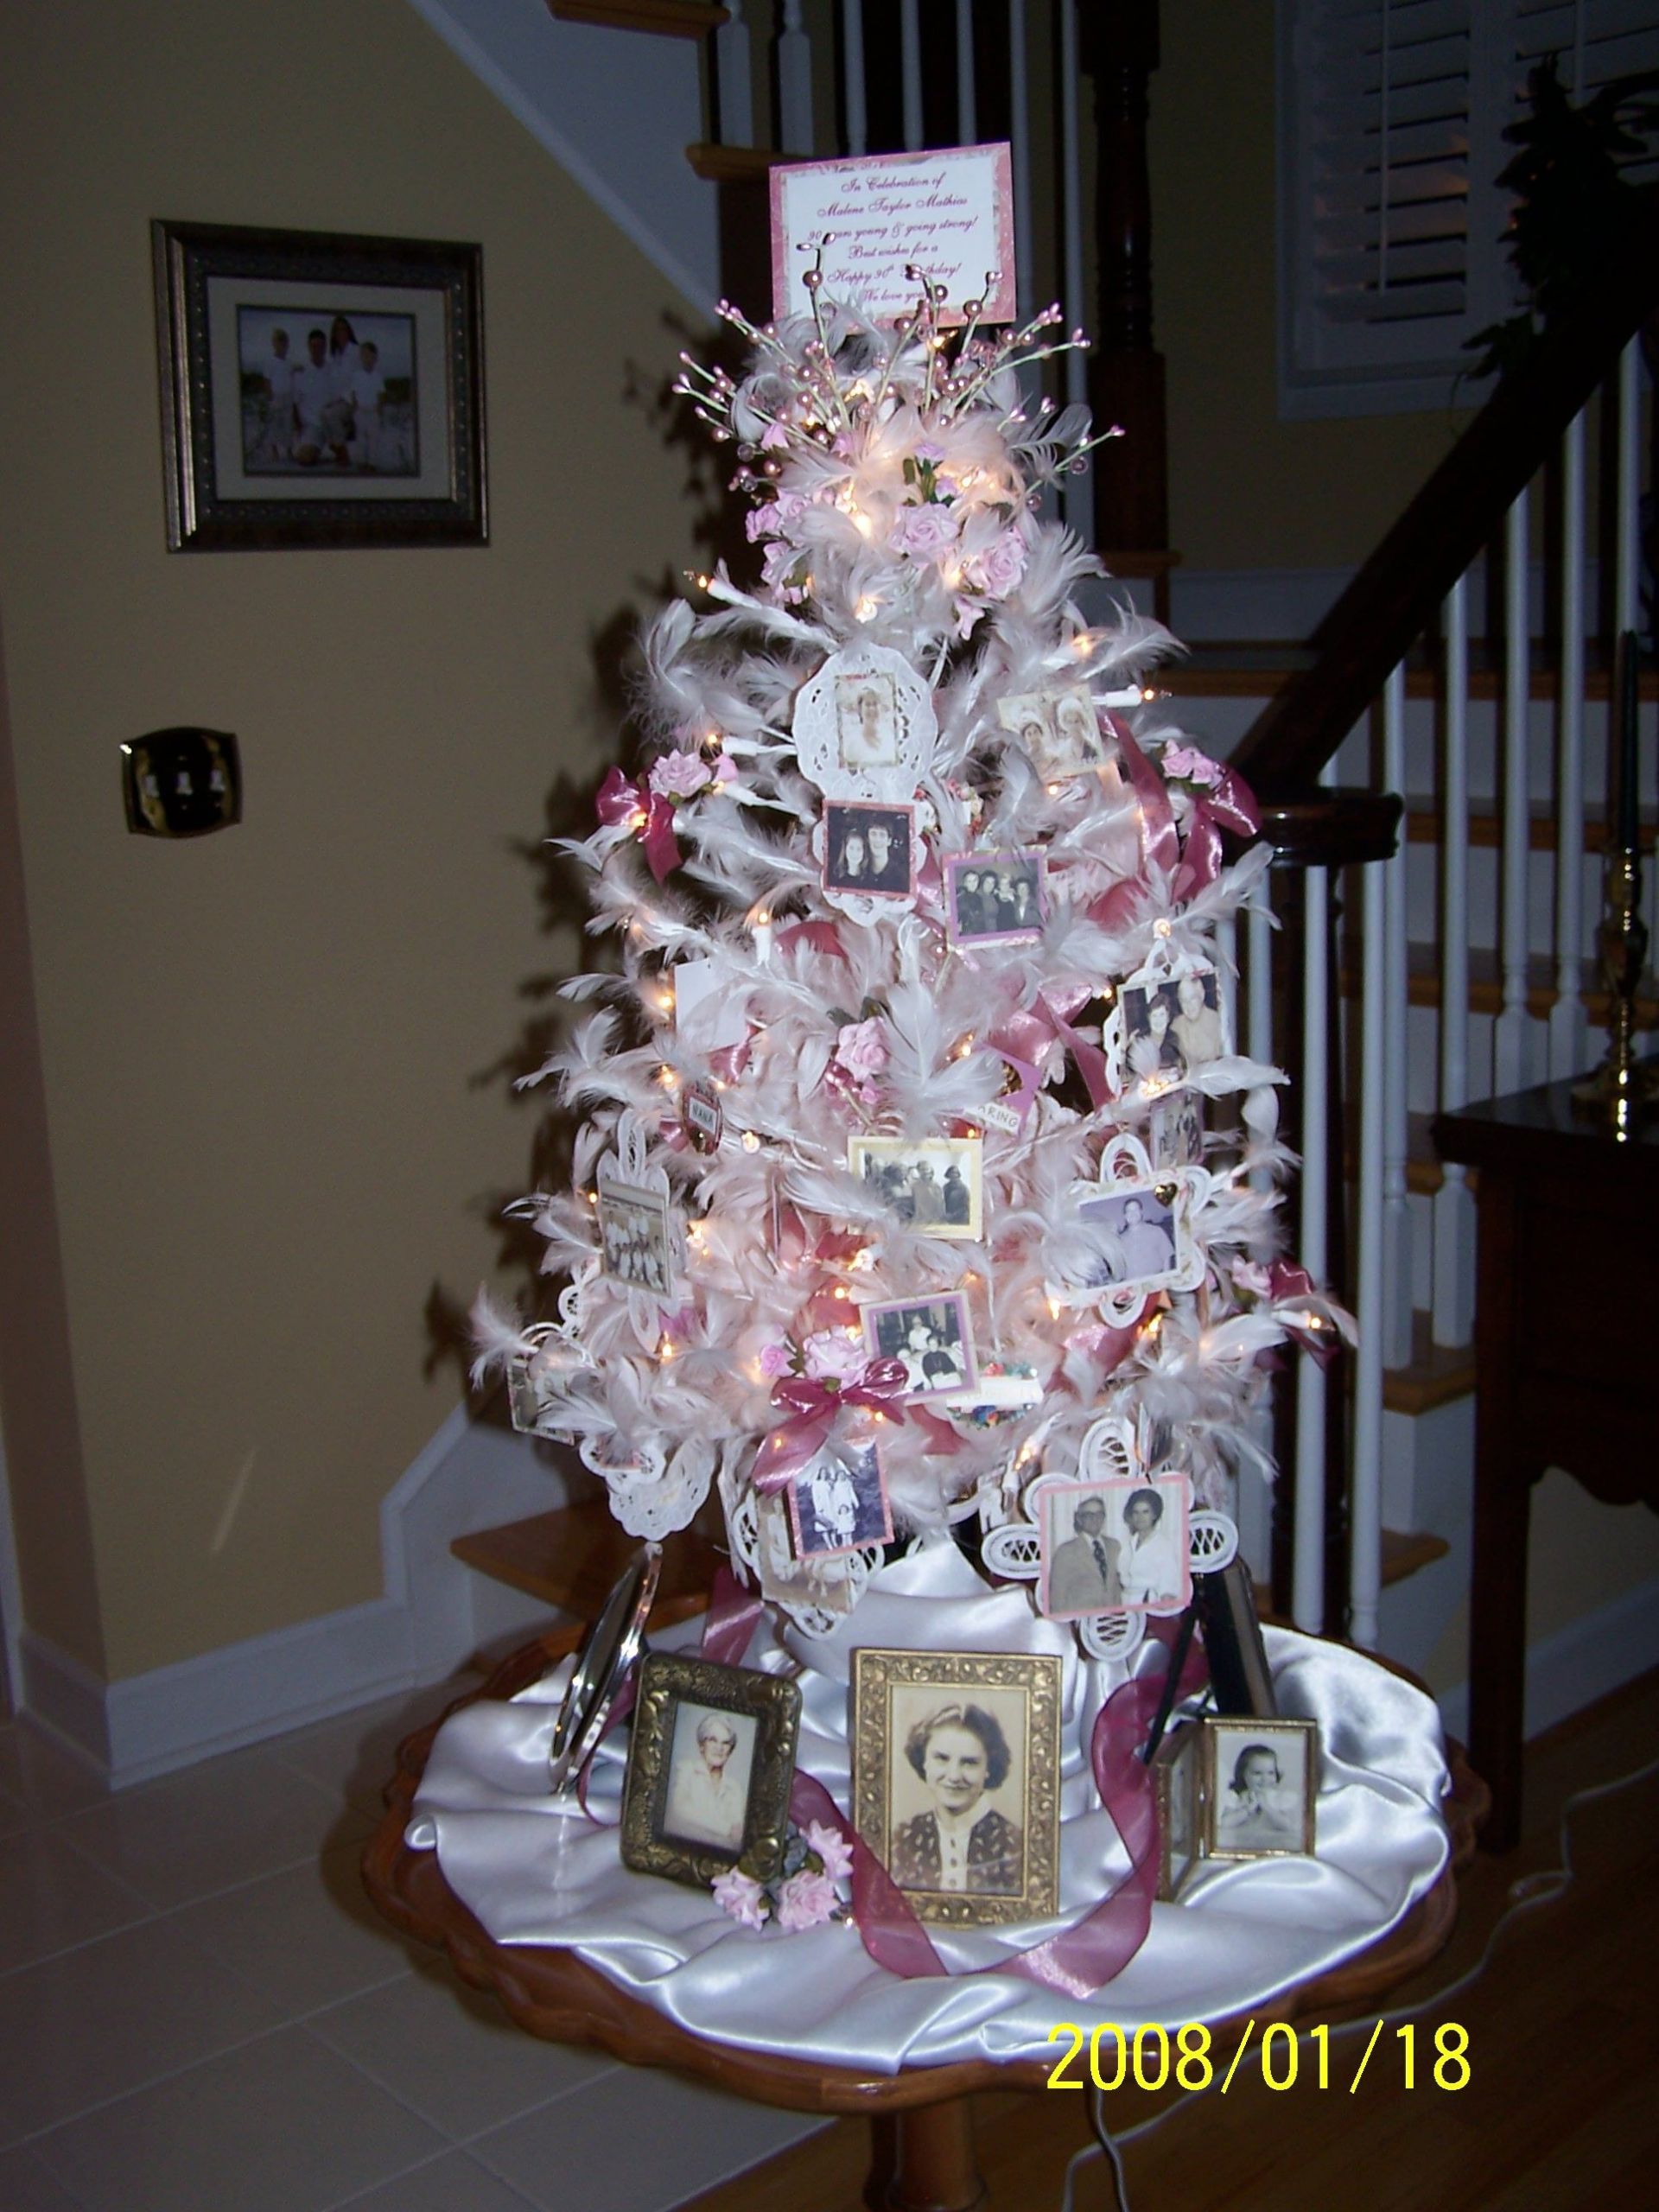 90th Birthday Party Ideas
 "Birthday tree" for my husband s grandmother s 90th